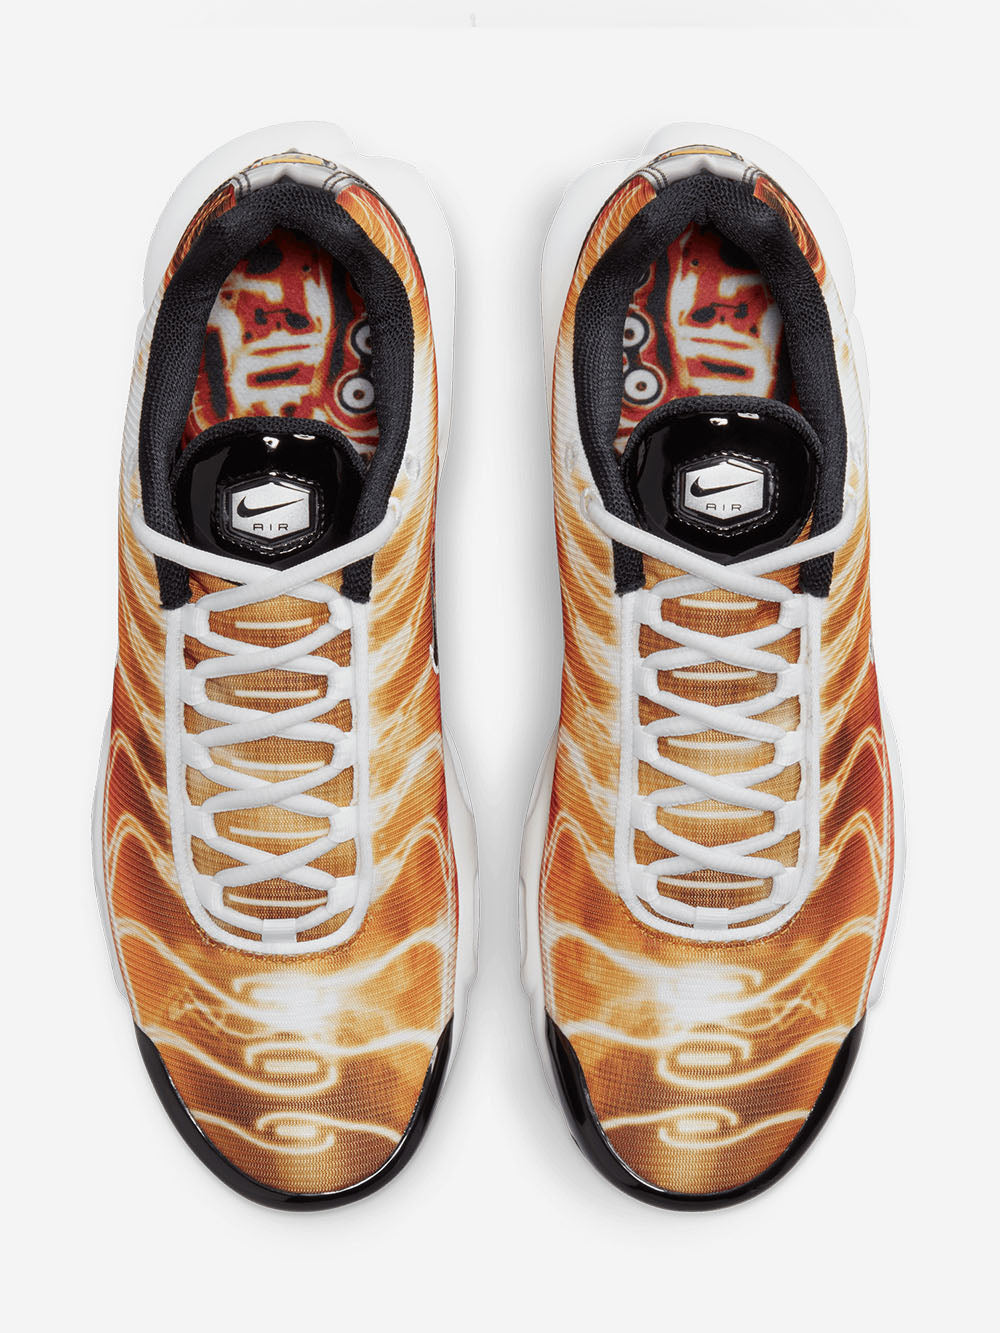 NIKE Air Max Plus OG "Light Photography" Sneakers Rosso Urbanstaroma